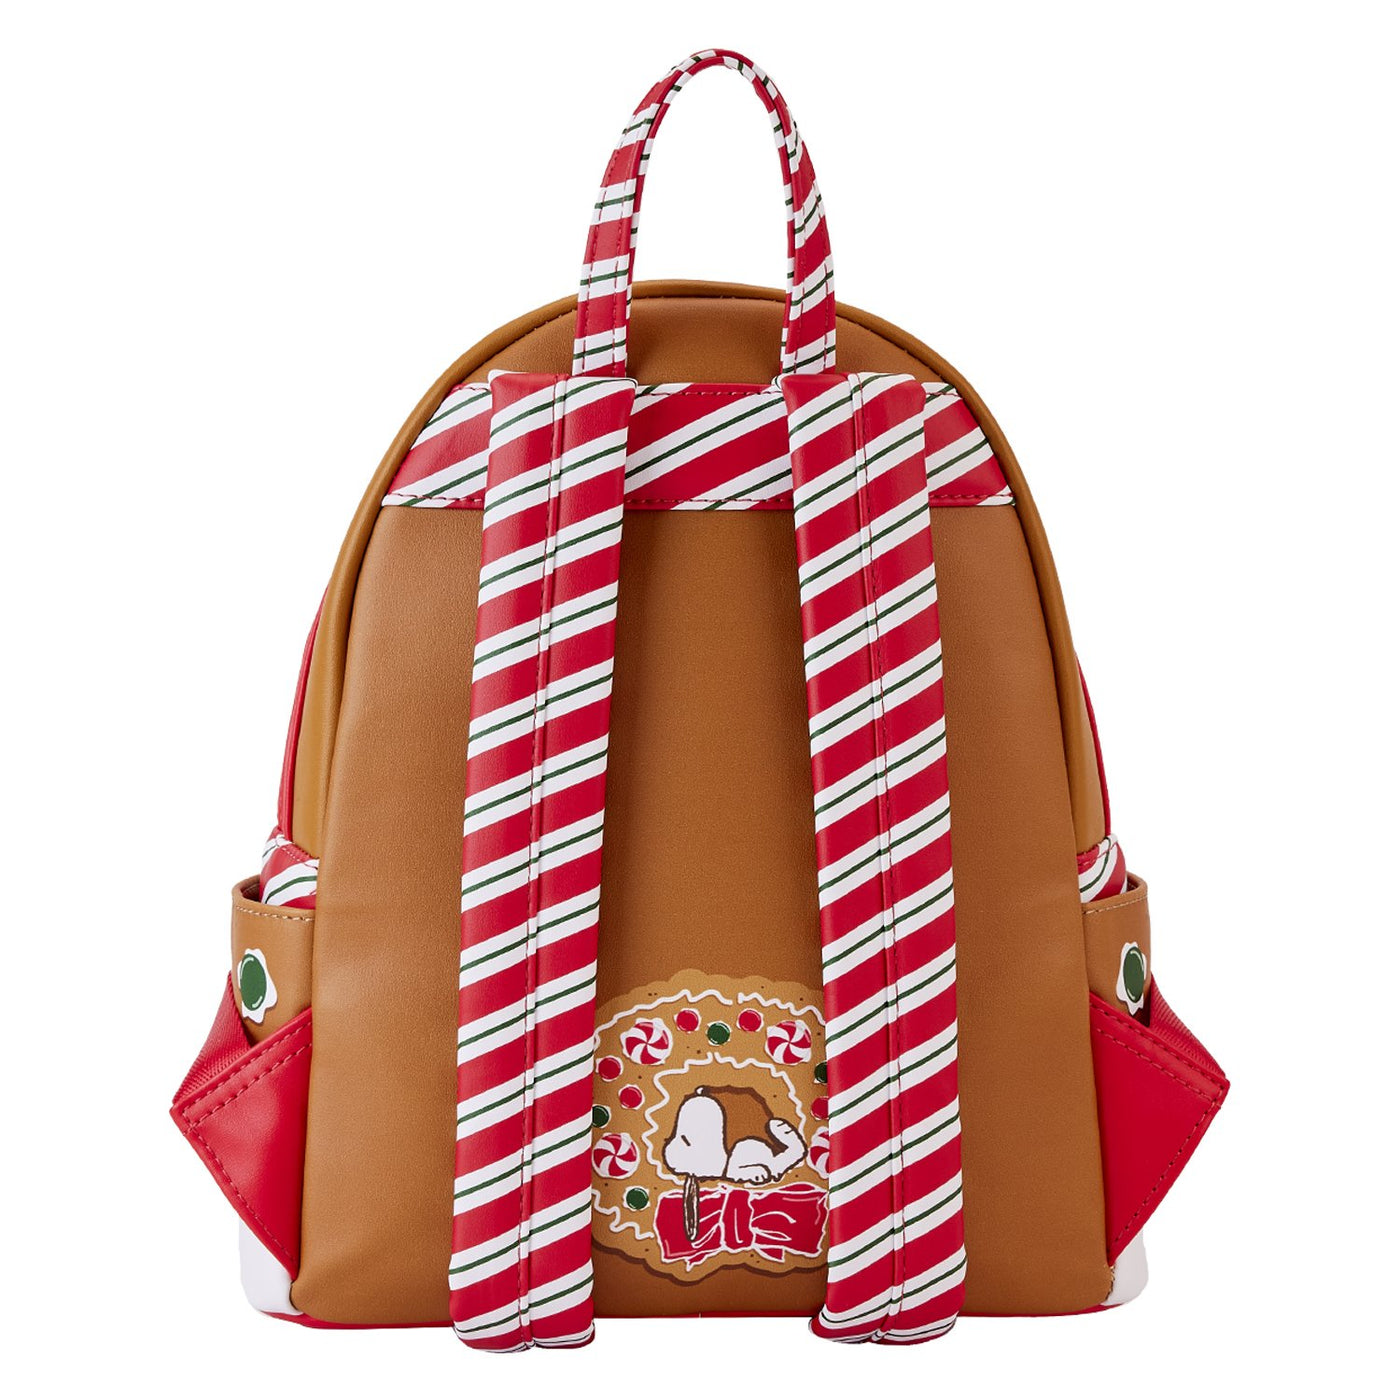 Loungefly Peanuts Snoopy Gingerbread House Mini Backpack - Back